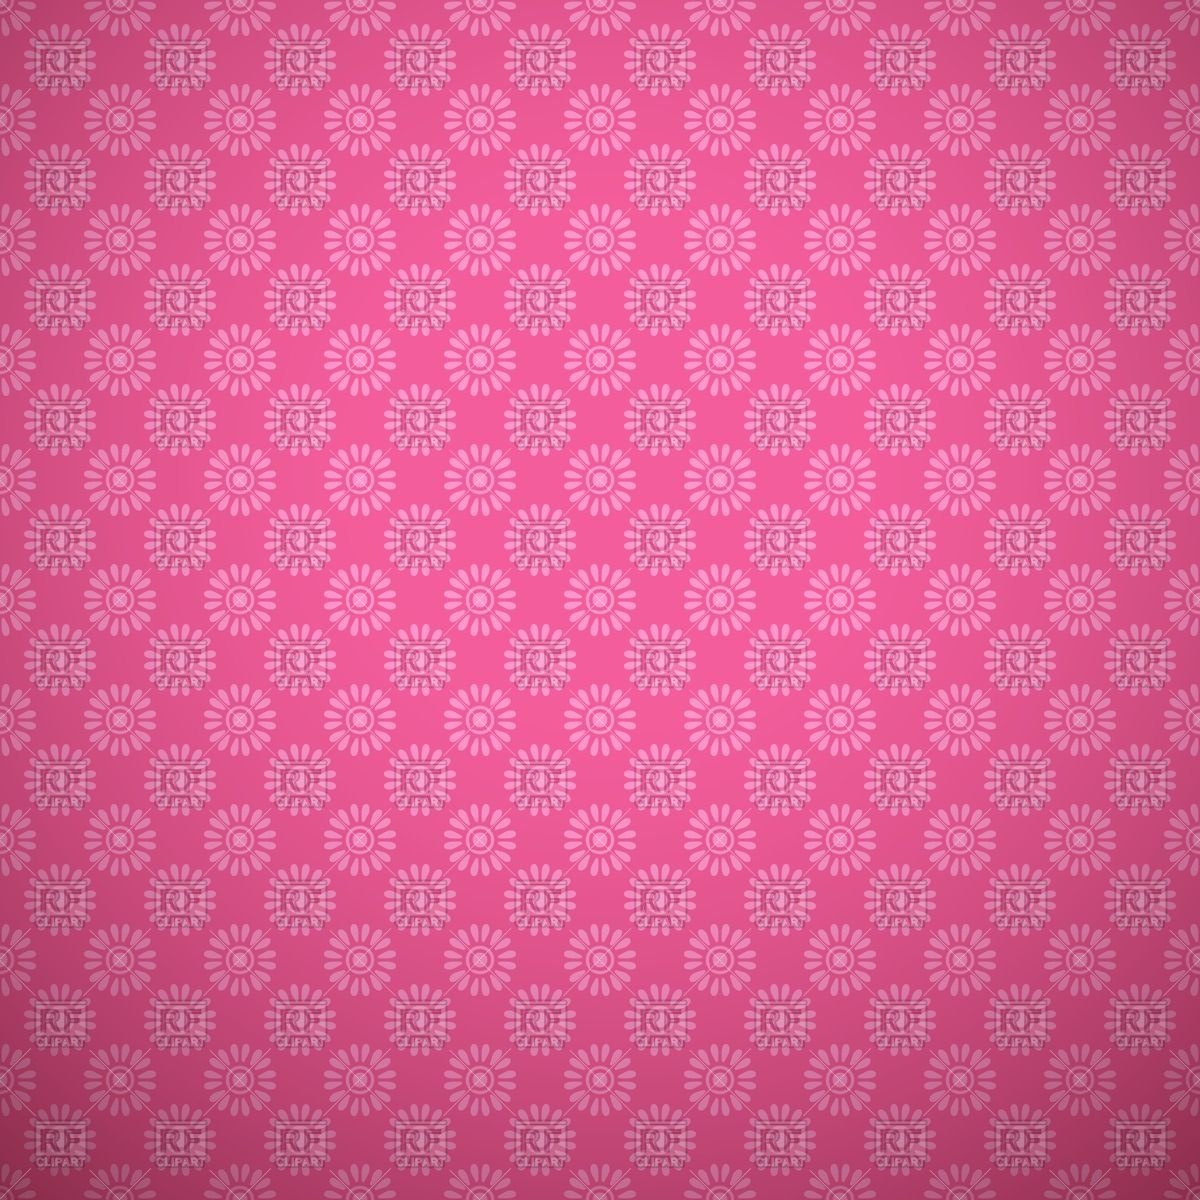 Endless Pink Vintage Wallpaper With Stylized Flowers 40998 Download